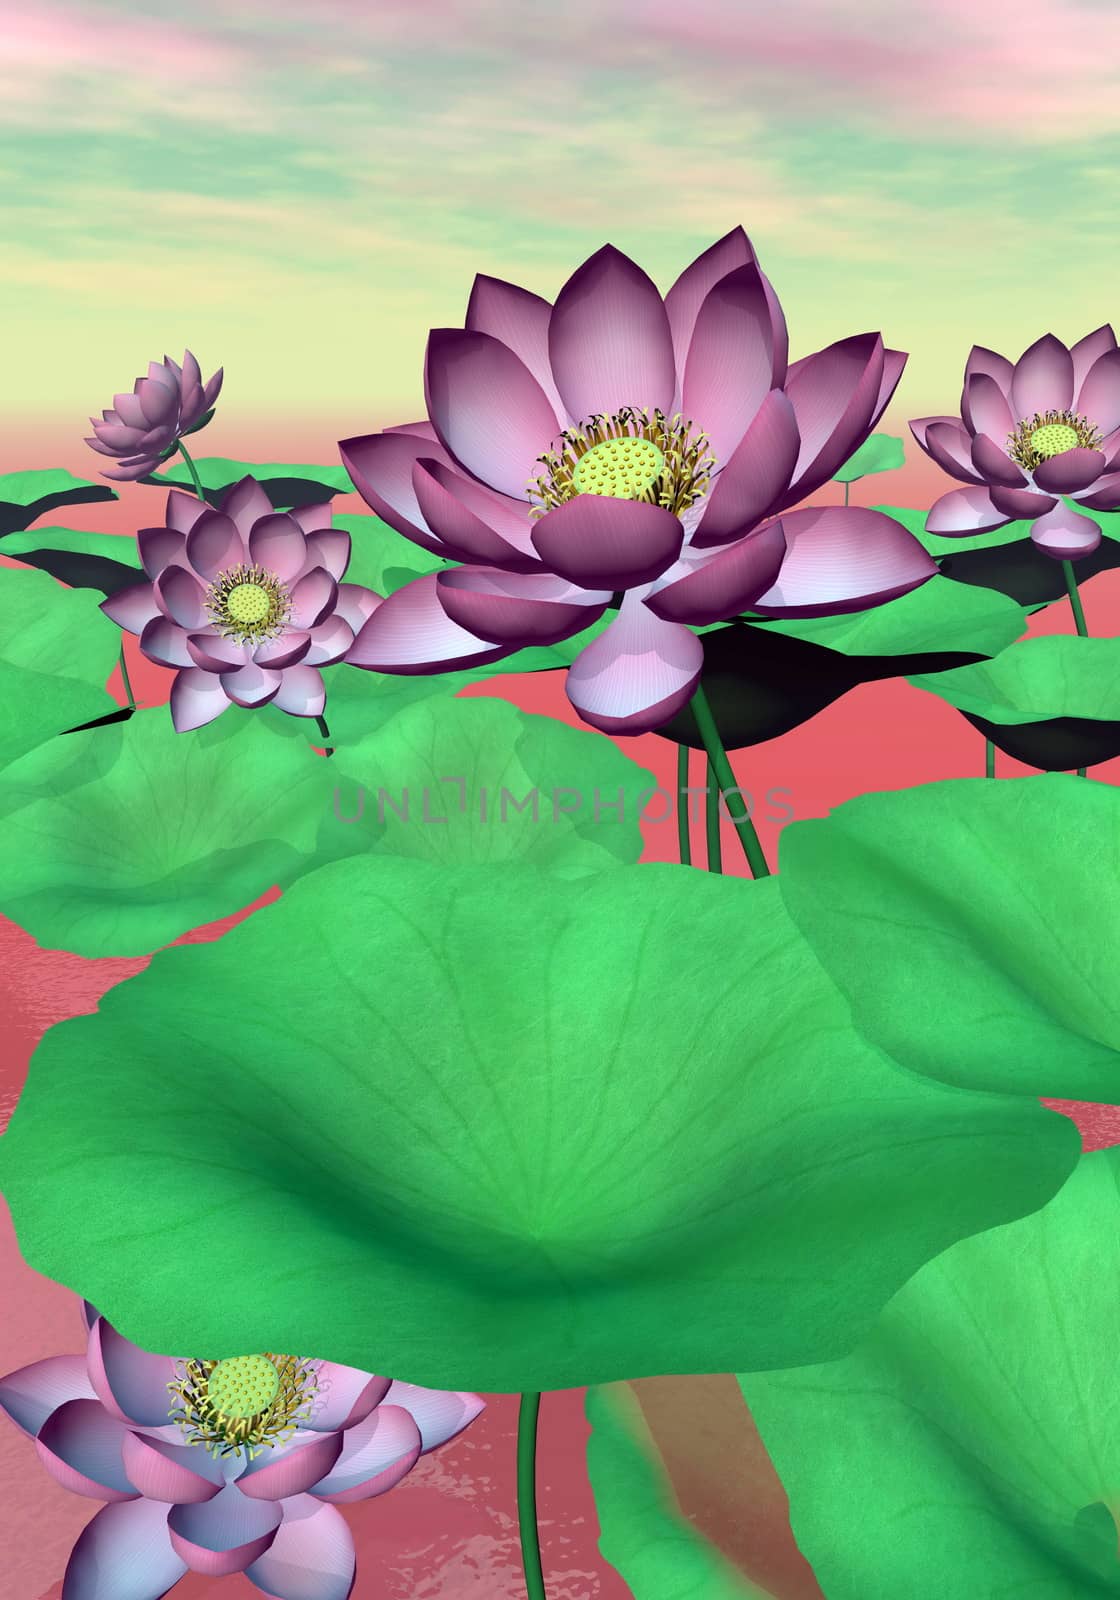 Beautiful pink water lilies and lotus flowers with leaves by cloudy sunset light